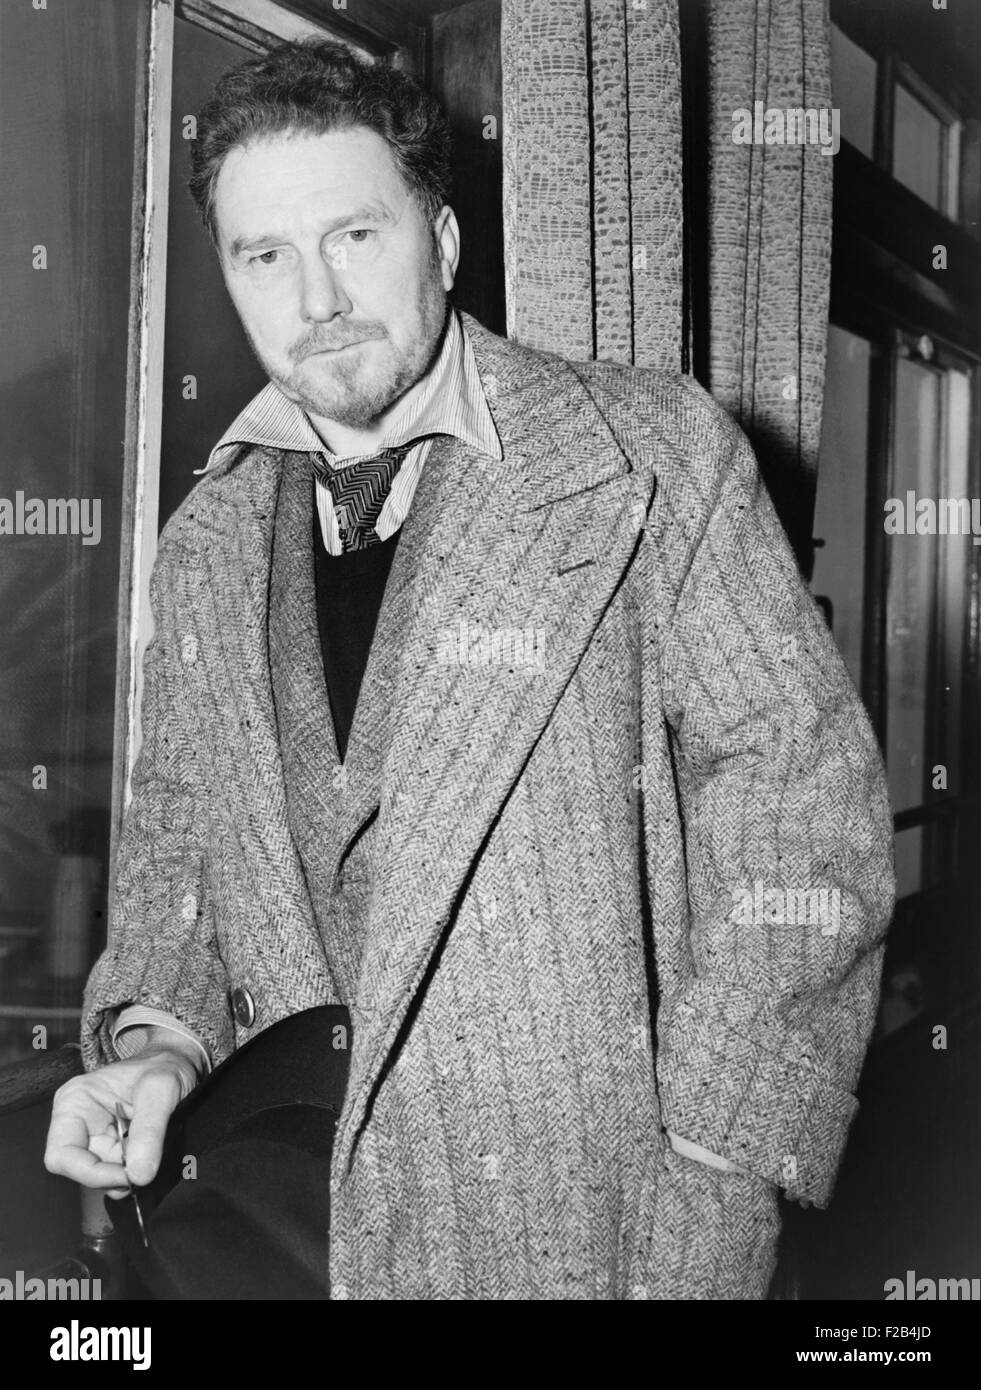 Ezra Pound, American born modernist poet who embraced European fascism in the 1930s. He was indicted in absentia for treason in Stock Photo